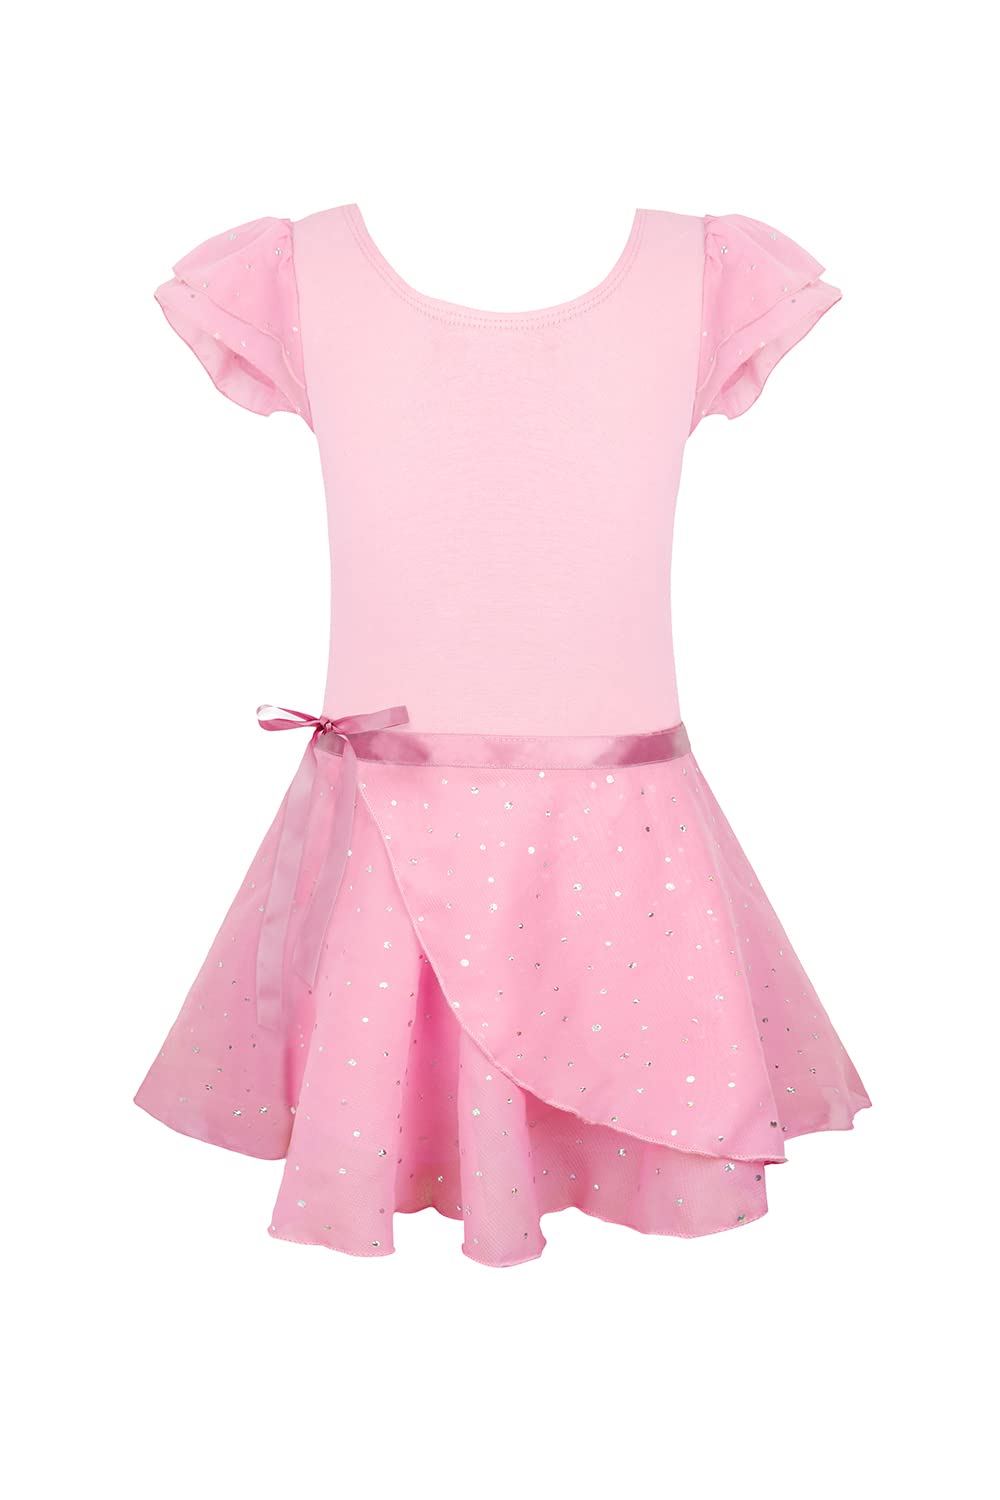 EQSJIU Pink Ballet Leotards For girls 5t Size 6 6-7 Years Old 5-6x Skirted Leotards With Skirts Ruffle Sleeve Dance Leotards For